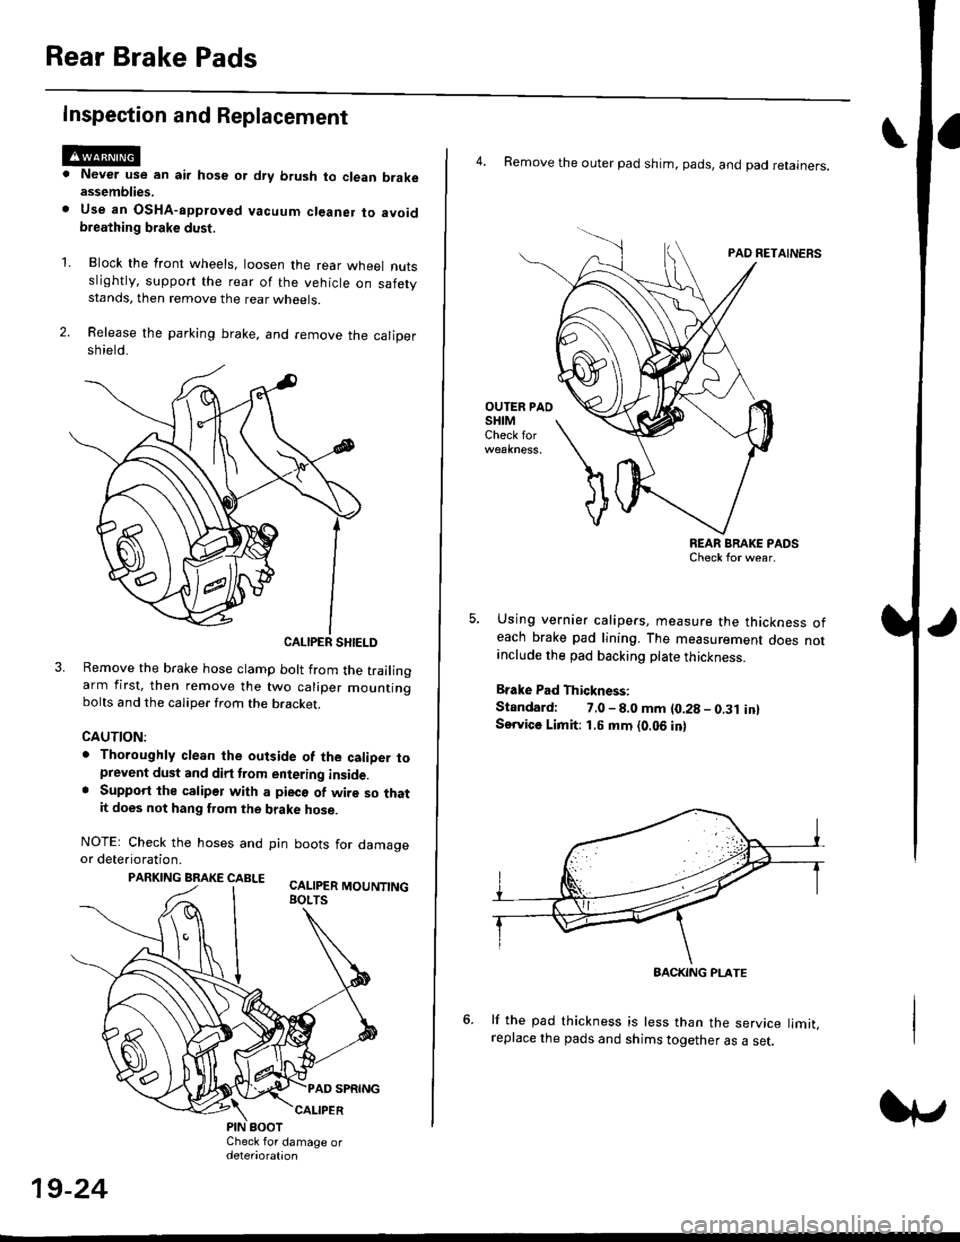 HONDA CIVIC 2000 6.G Owners Guide Rear Brake Pads
Inspection and Replacement
Never use an air hose or dry brush to clean brakeassemblies.
Use an OsHA-apptoved vacuum cl€aner to avoidbreathing brake dust,
Block the front wheels, loos